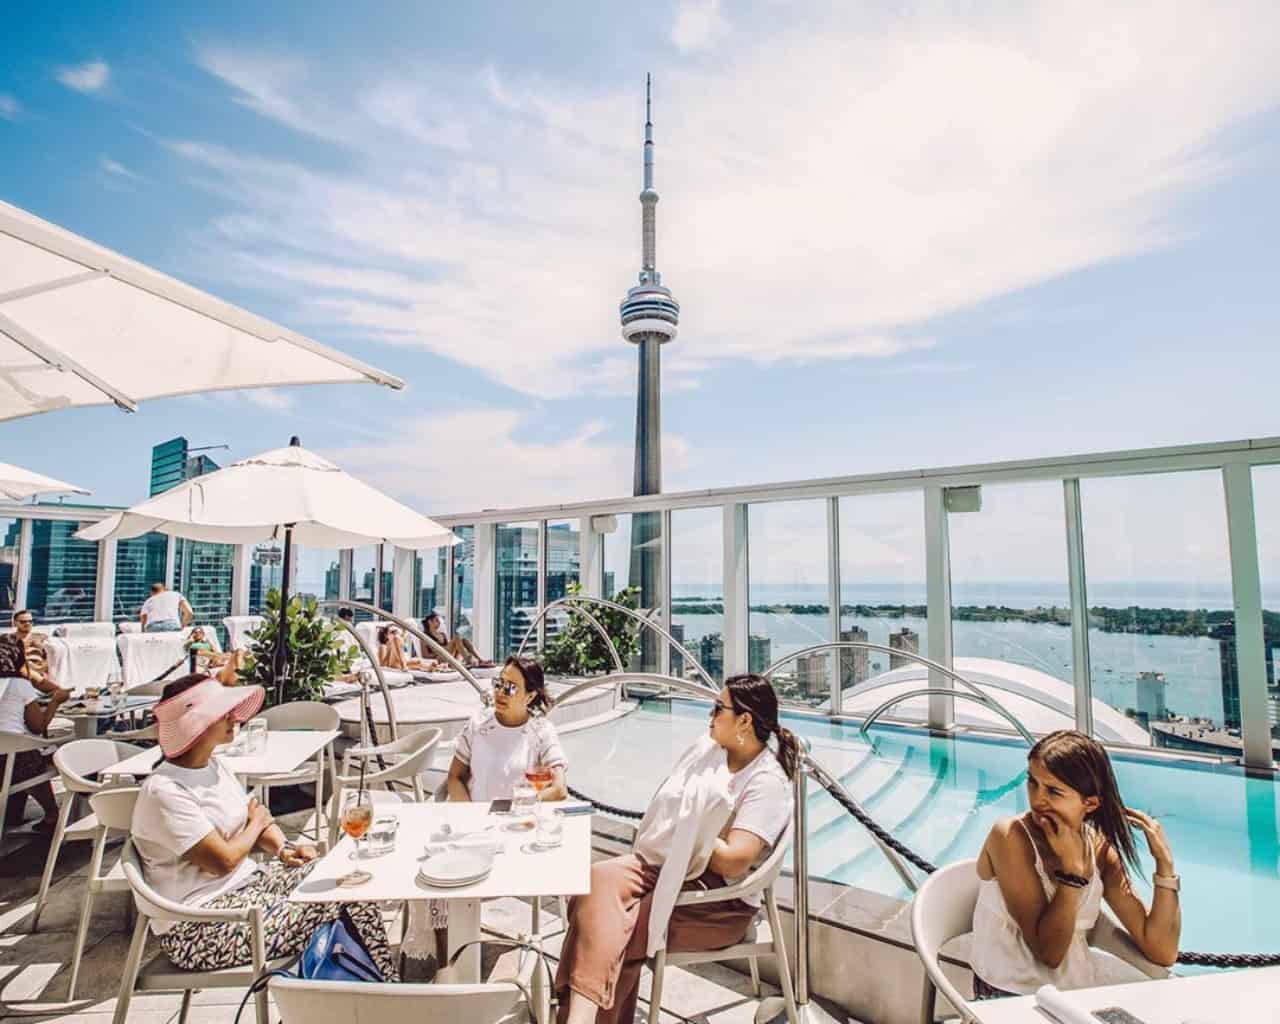 Top 5 best patios in Toronto for the summer of 2020